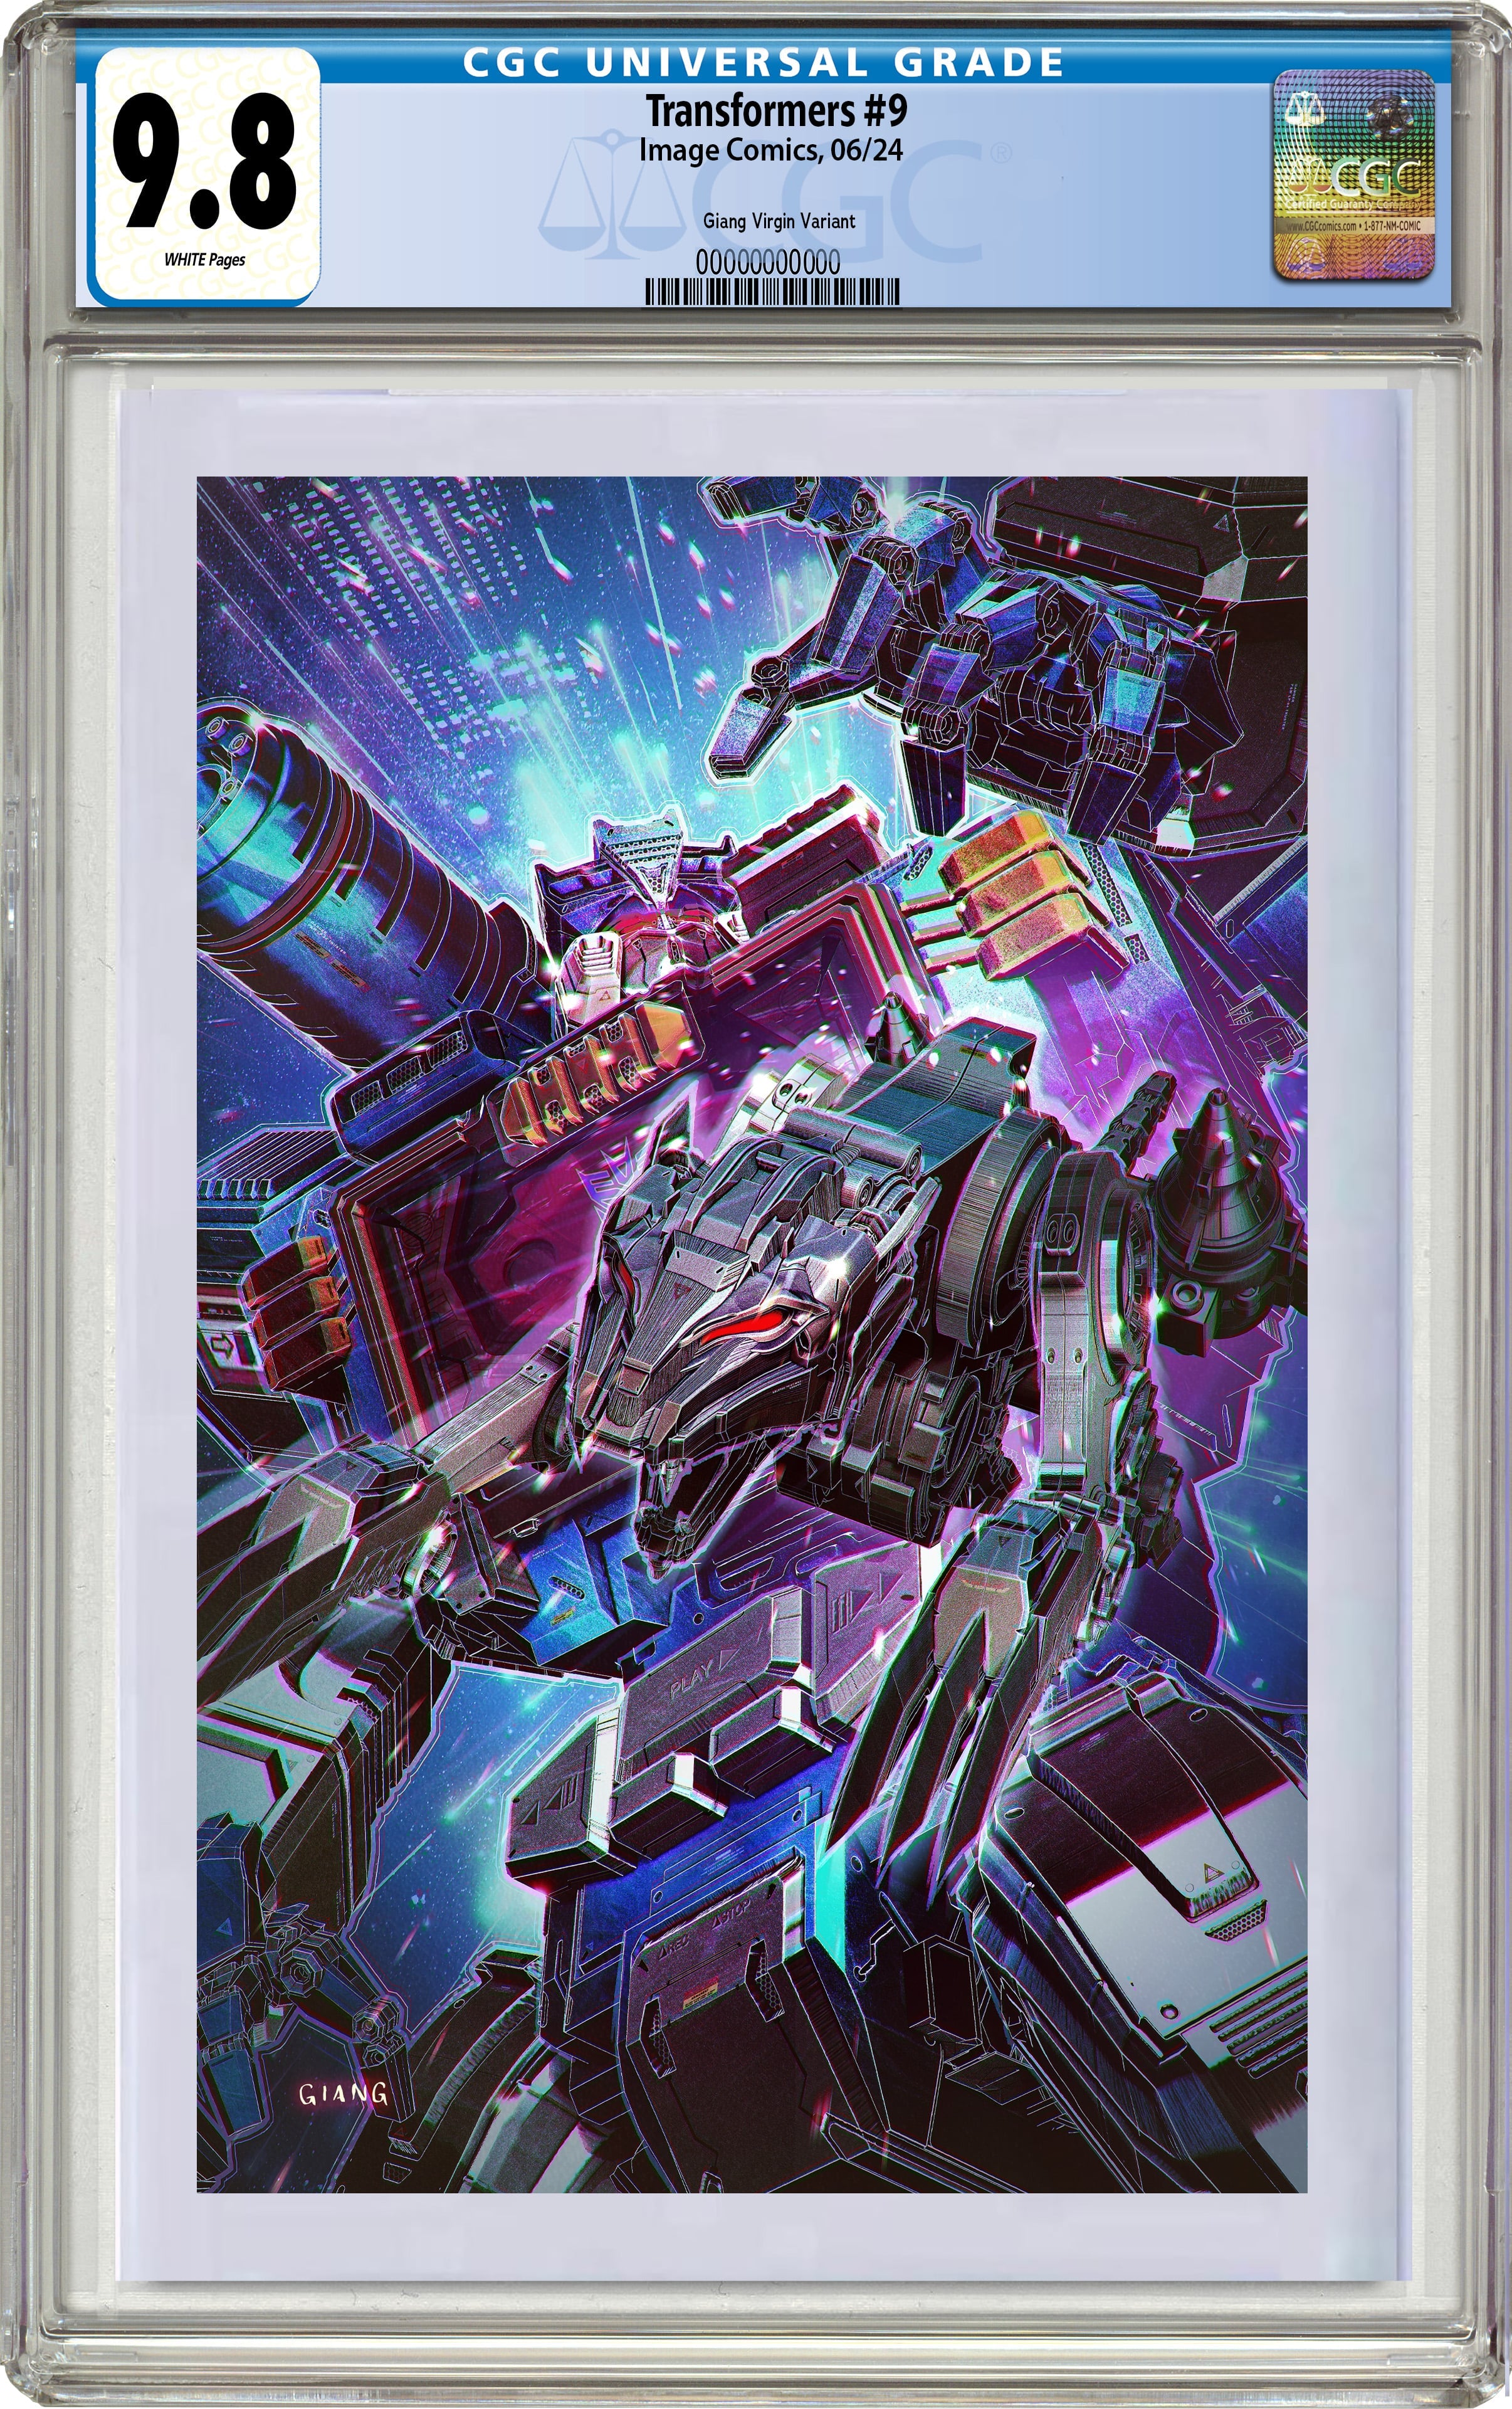 TRANSFORMERS #9 JOHN GIANG EXCLUSIVE VARIANT OPTIONS 06-12-24